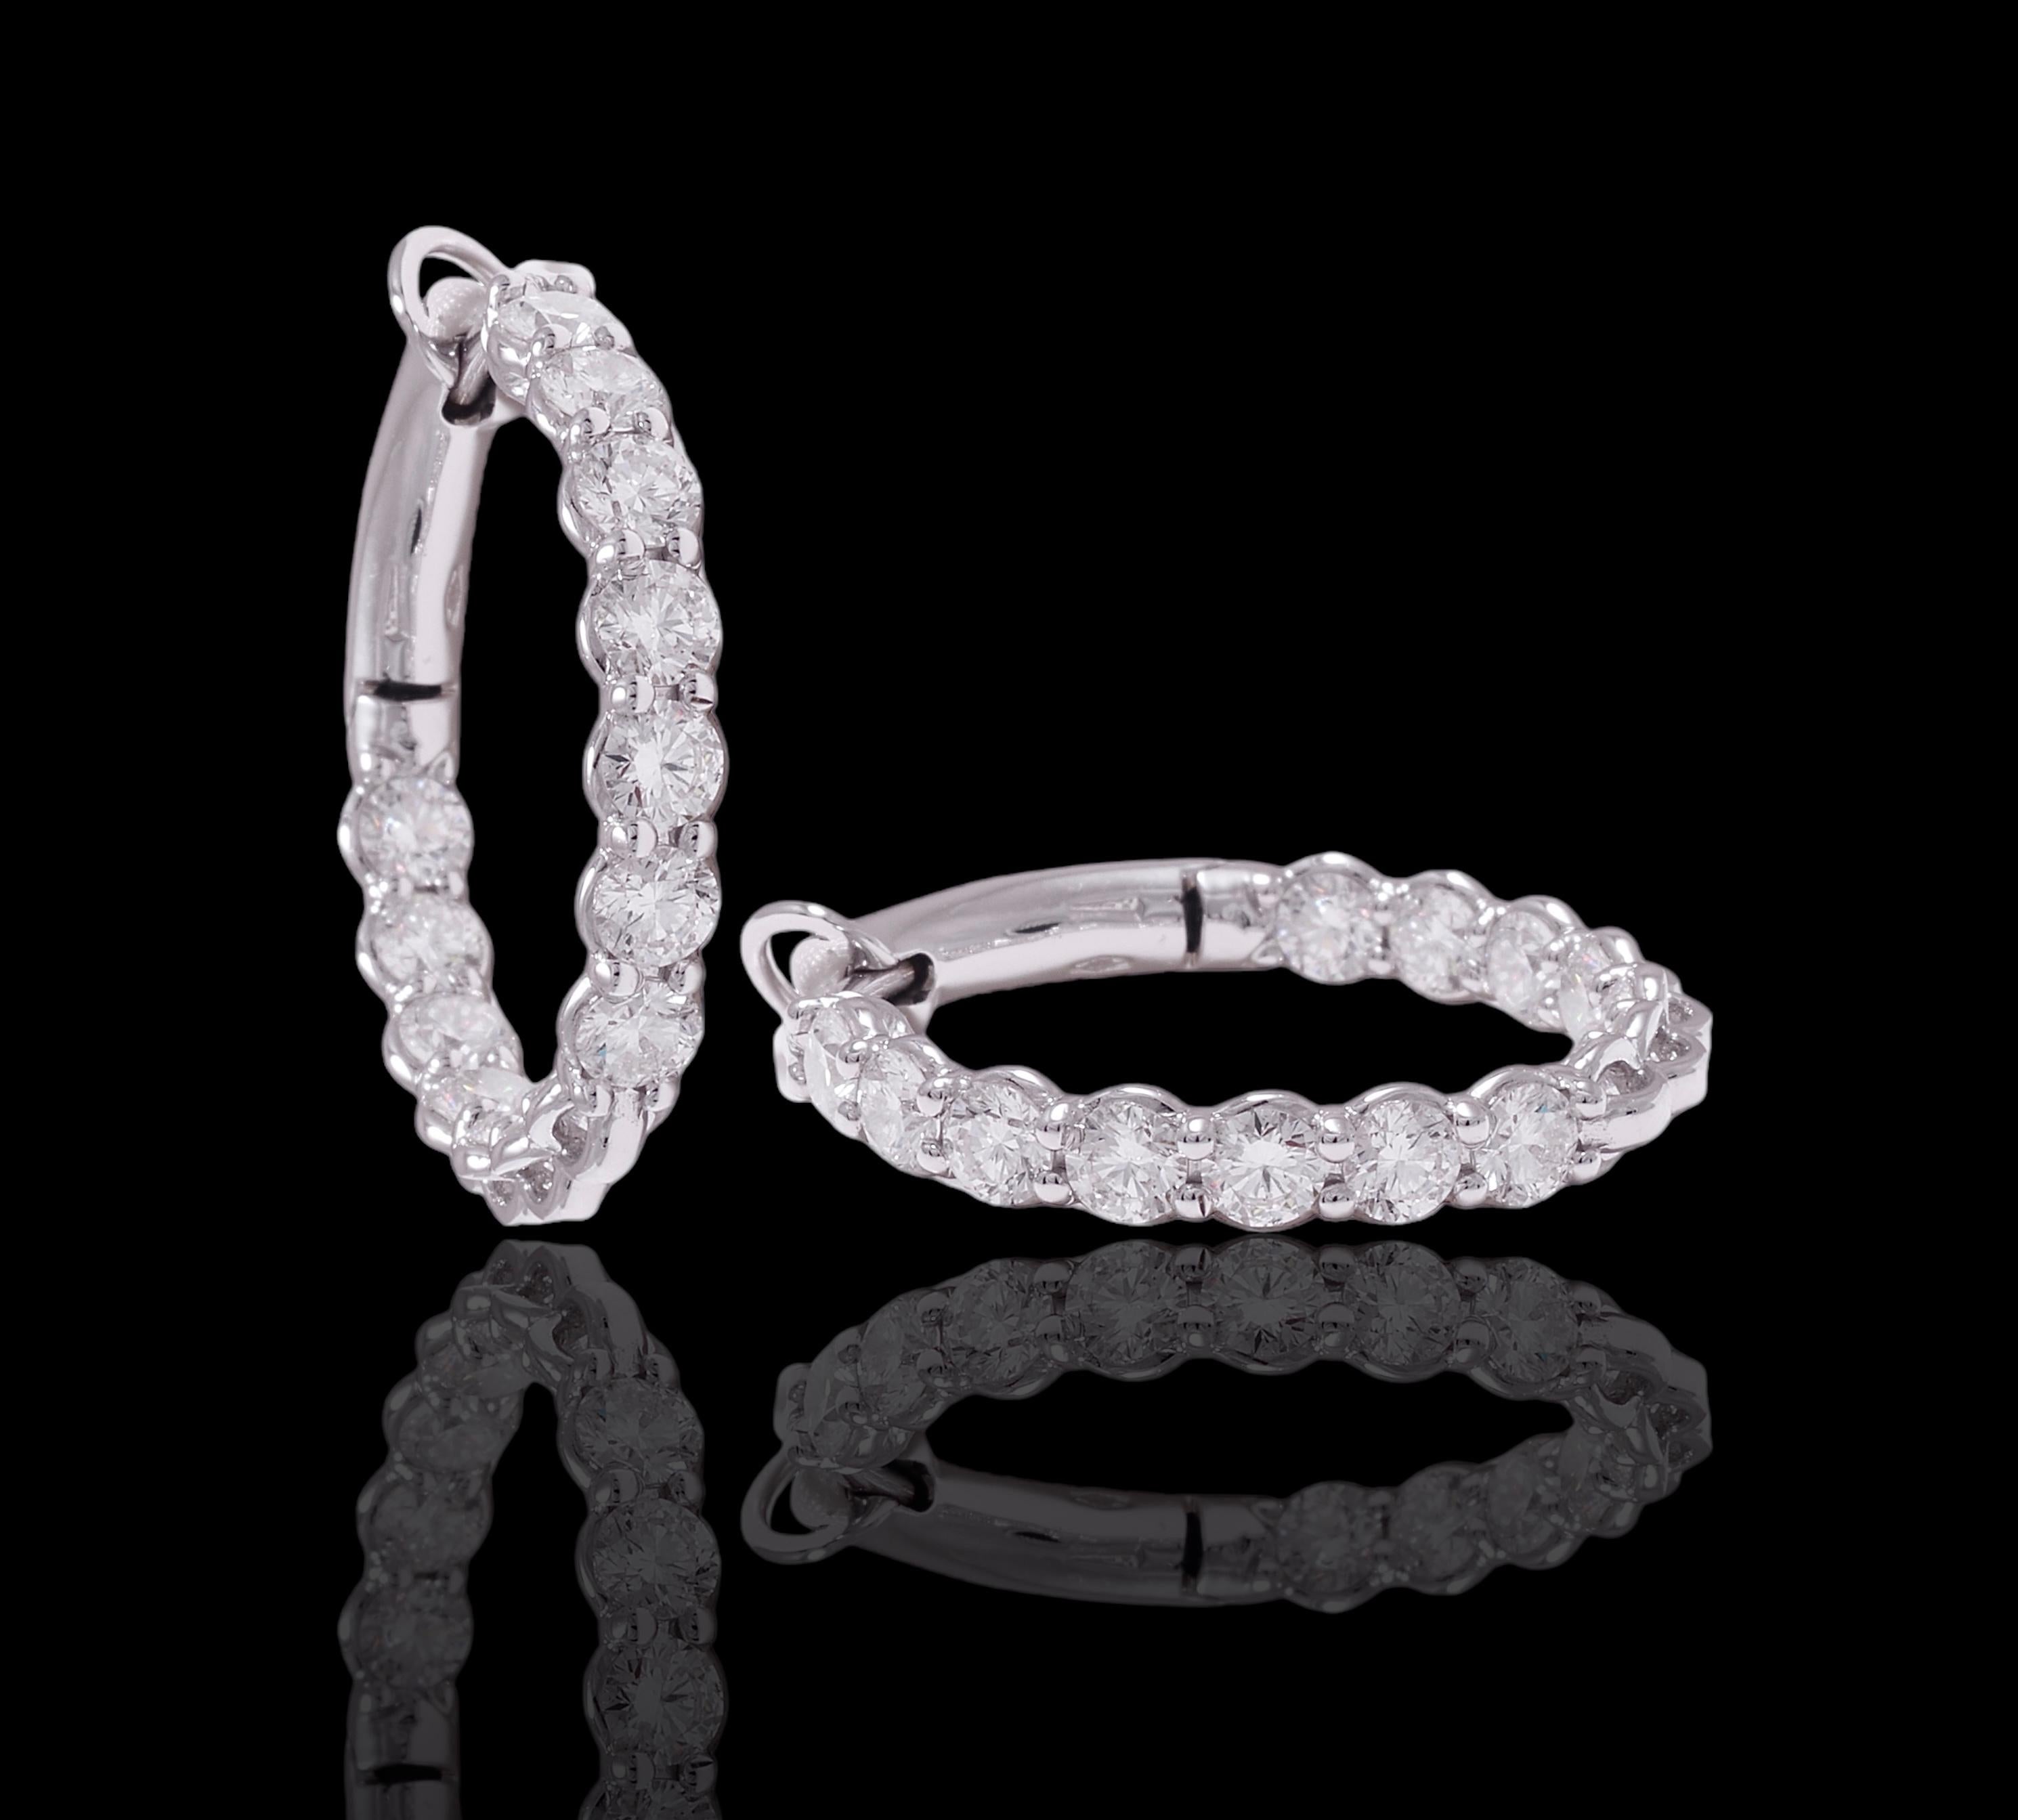  18 kt. White Gold Loop Earrings With 3.14 ct. Diamonds  For Sale 3